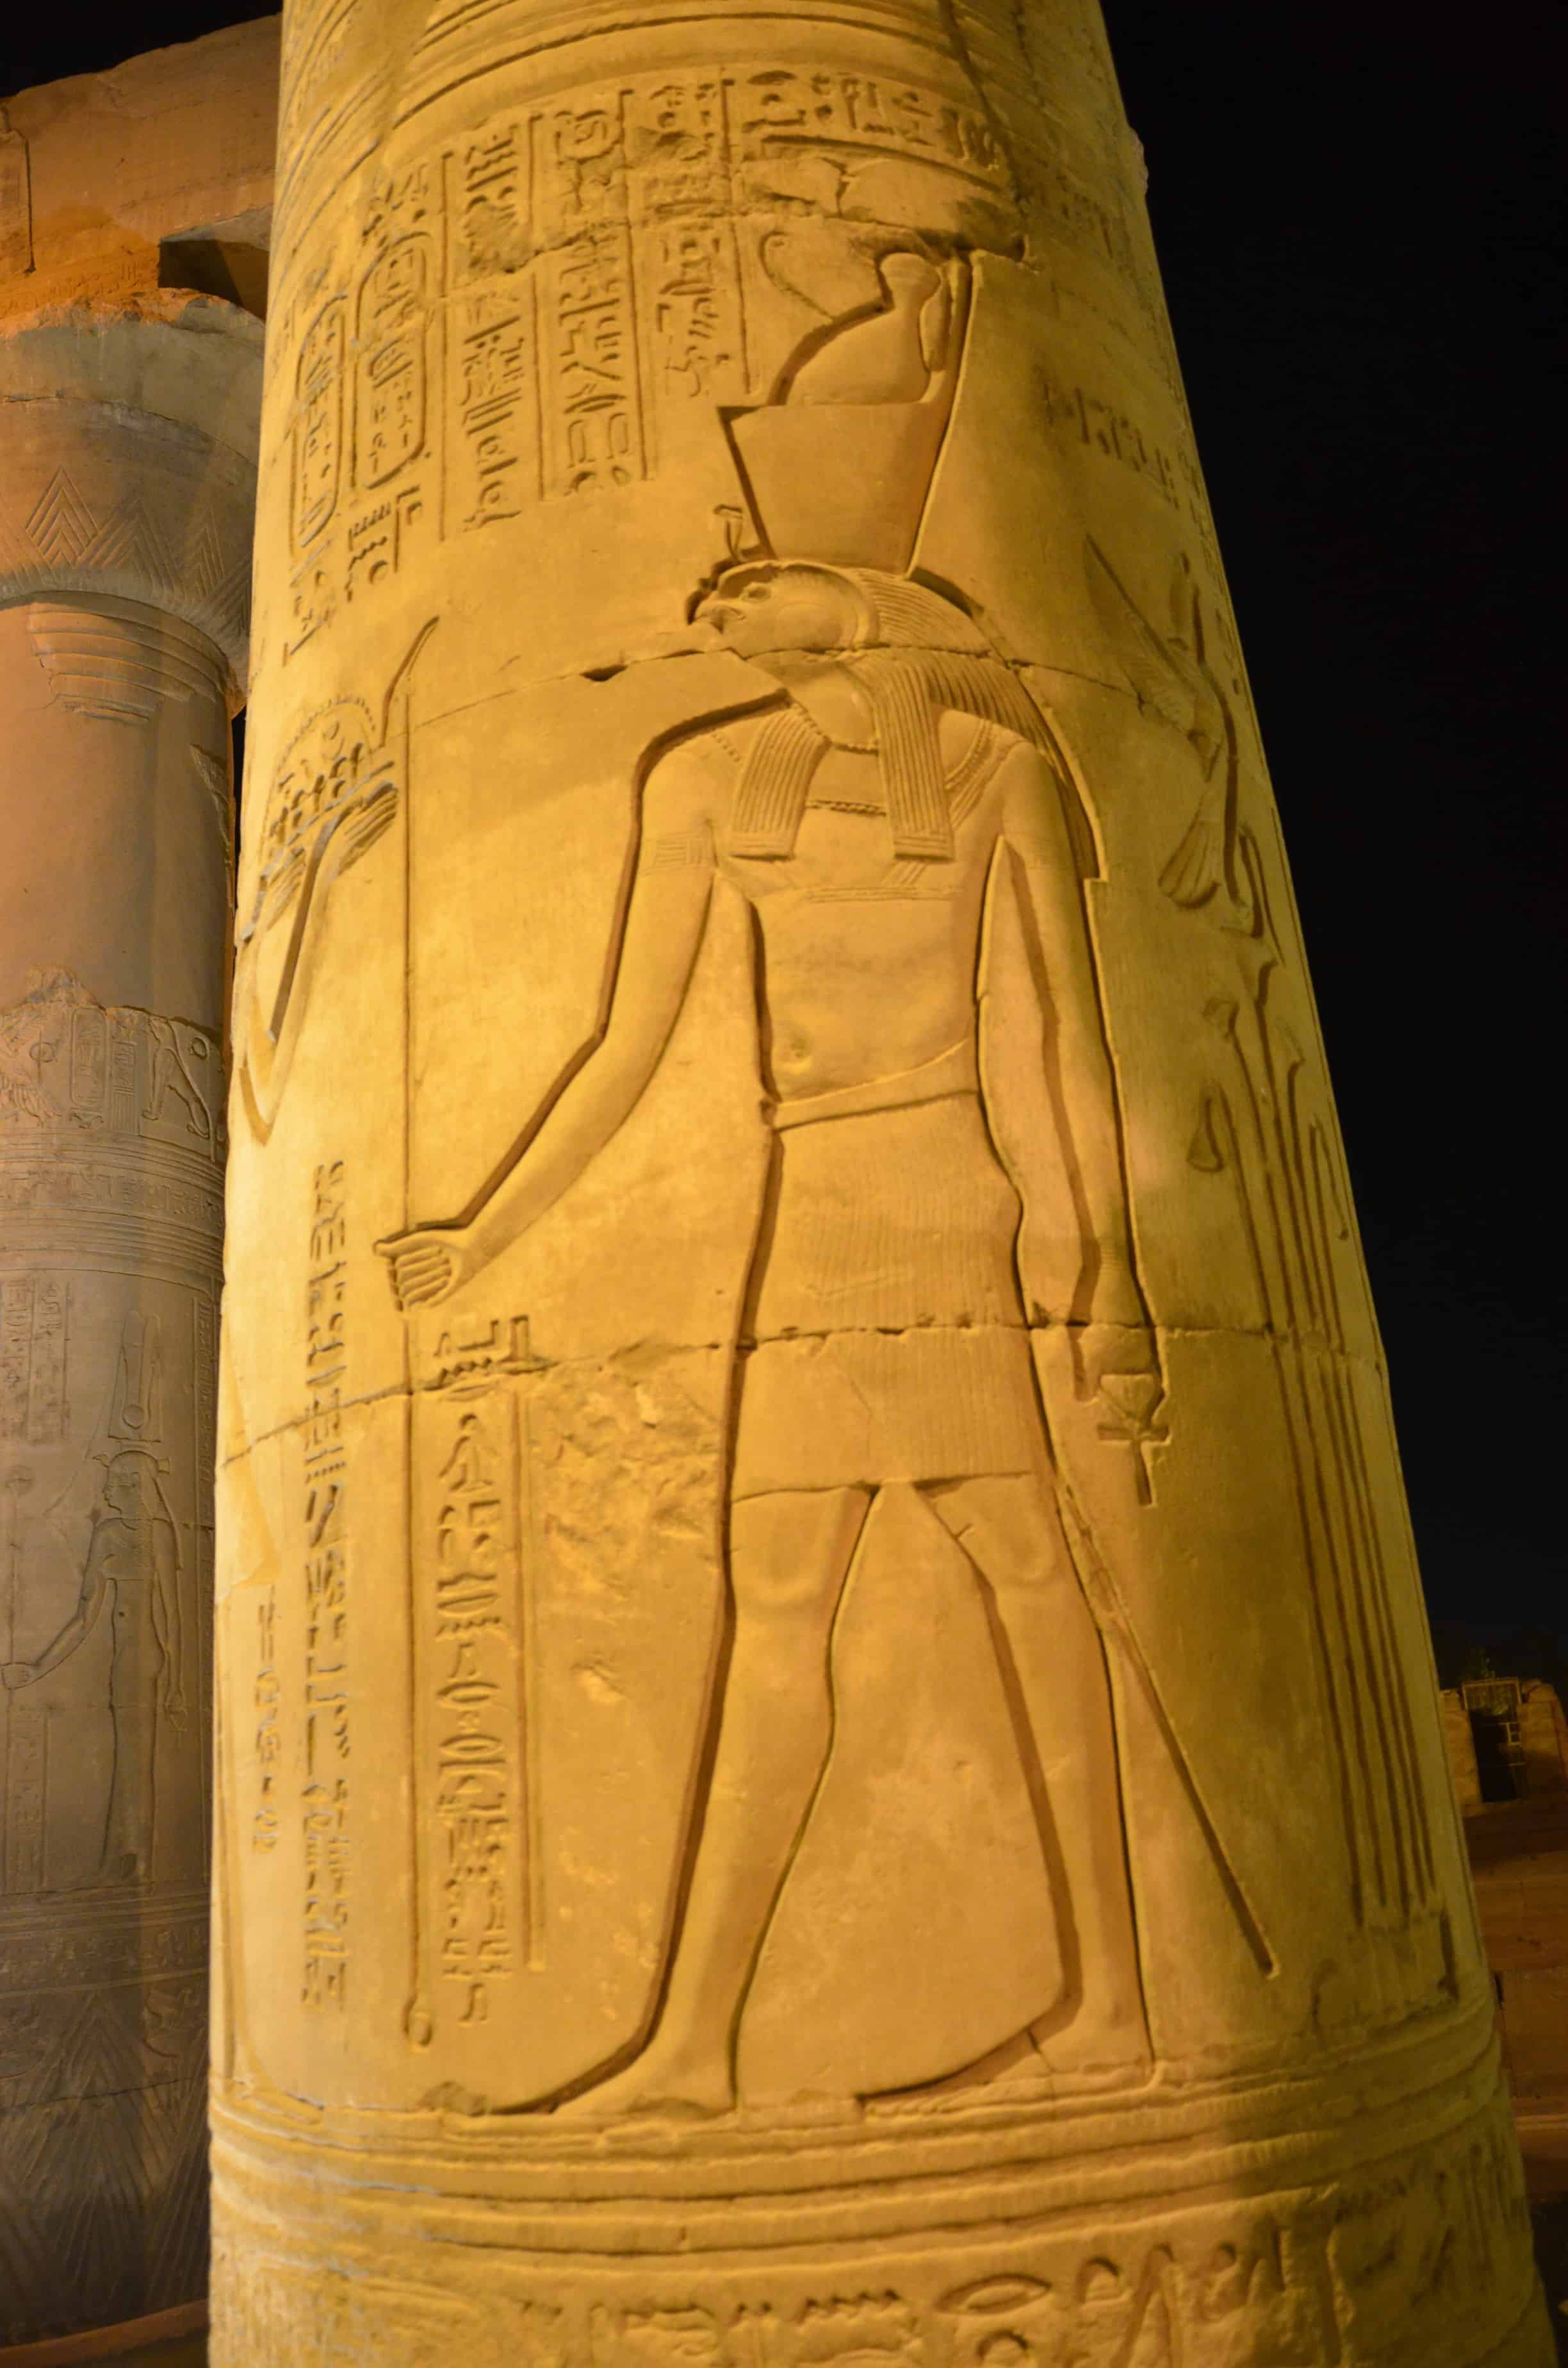 Hieroglyphics on a column at the Temple of Kom Ombo, Egypt